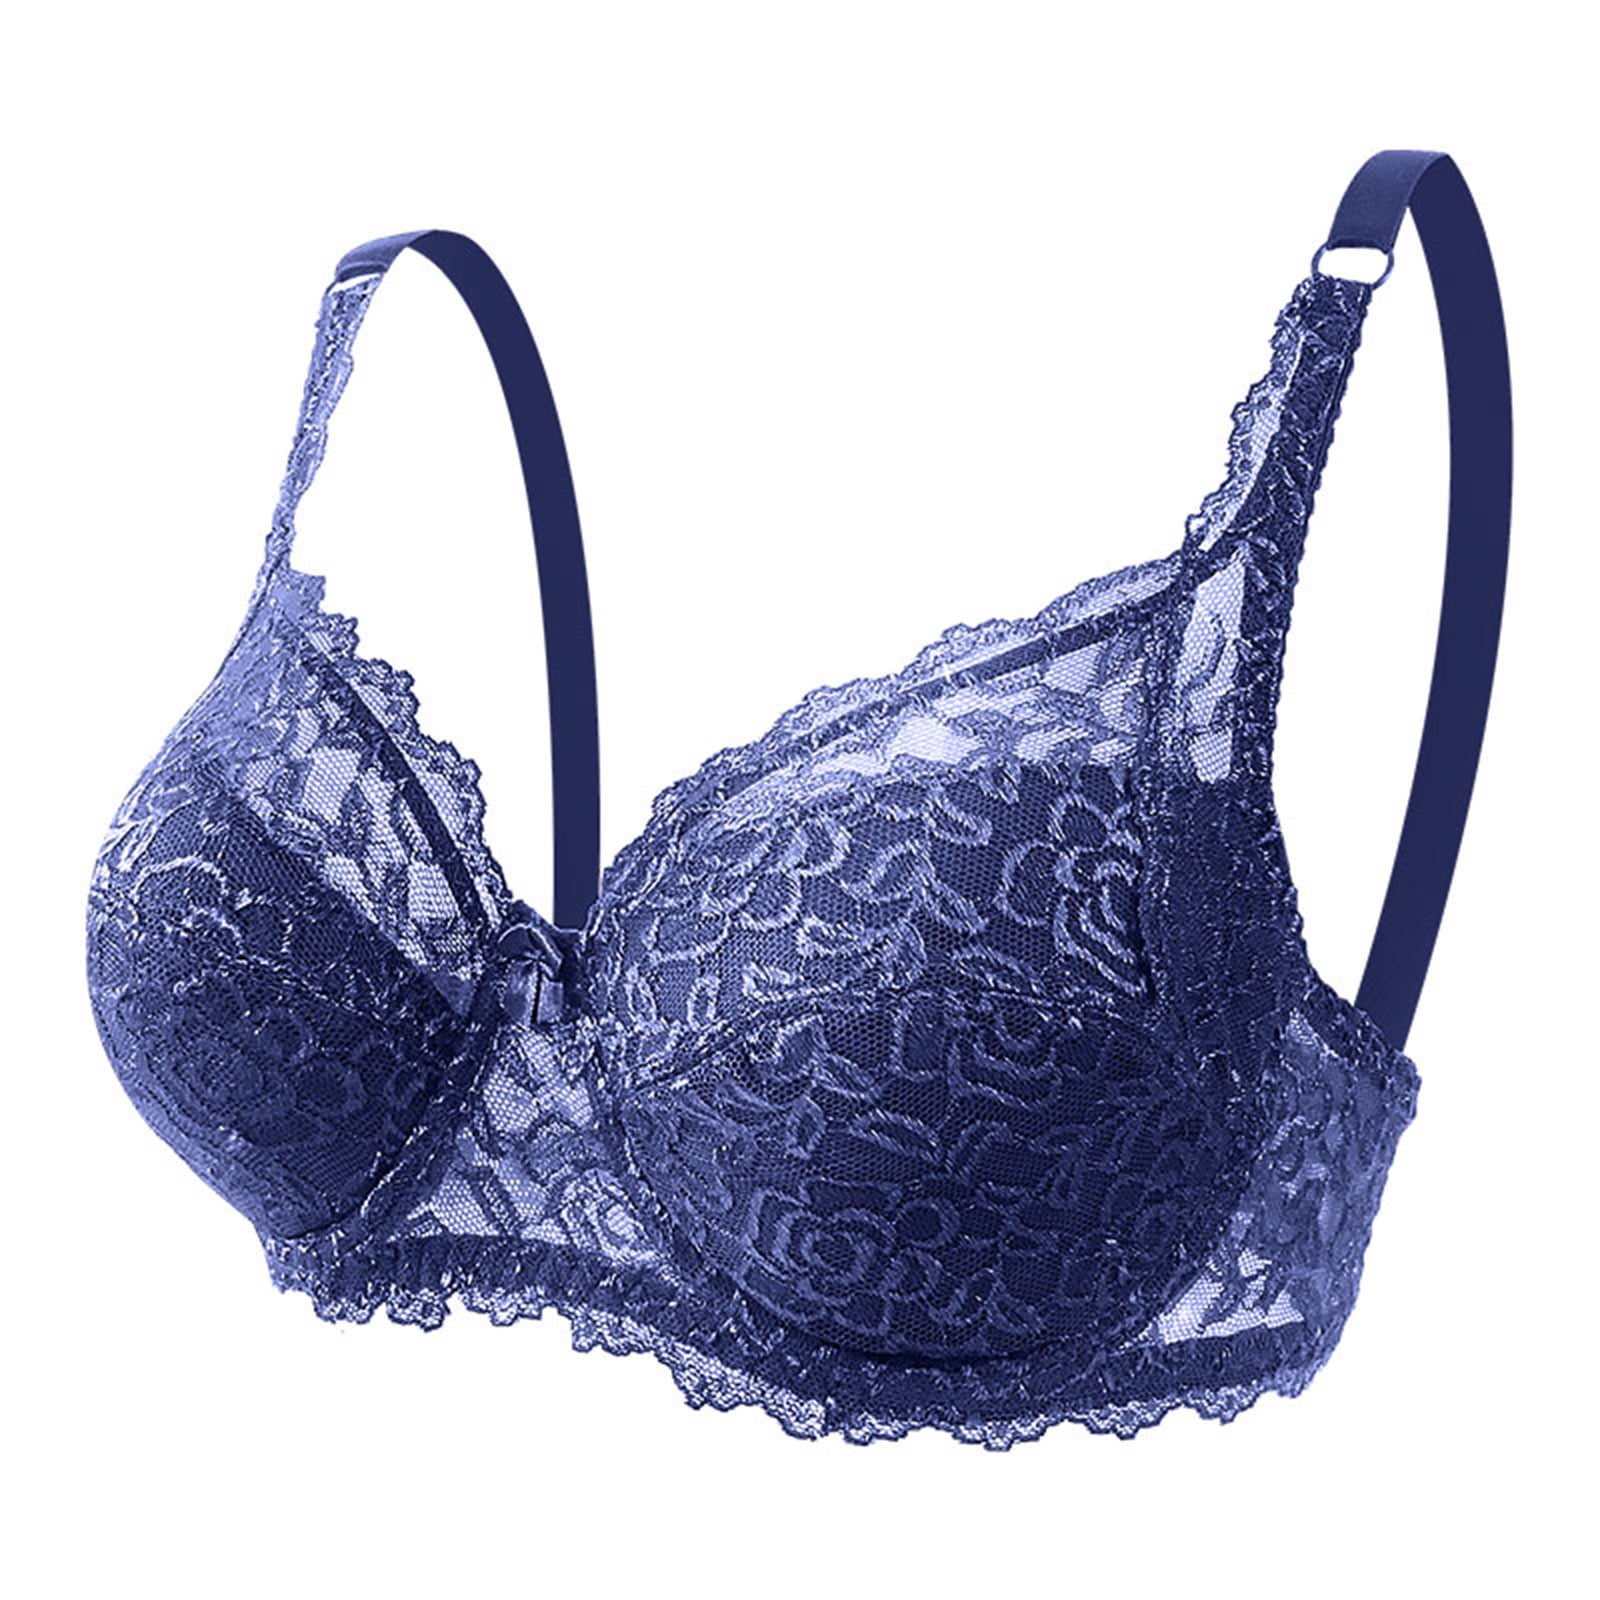 Xysaqa Women's Push Up Floral Lace Bra, Comfy Padded Plunging